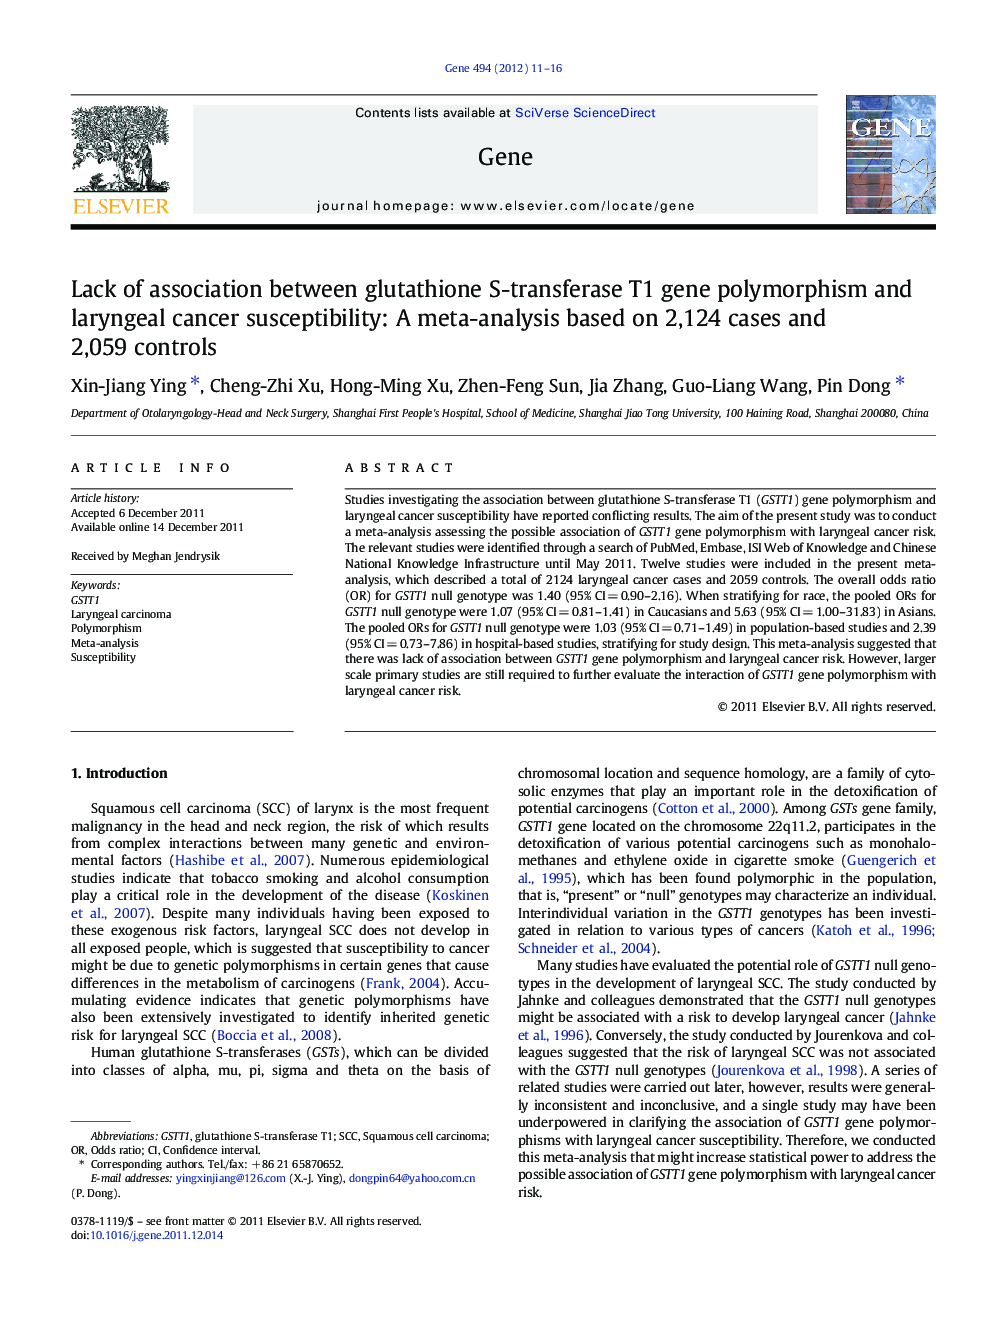 Lack of association between glutathione S-transferase T1 gene polymorphism and laryngeal cancer susceptibility: A meta-analysis based on 2,124 cases and 2,059 controls